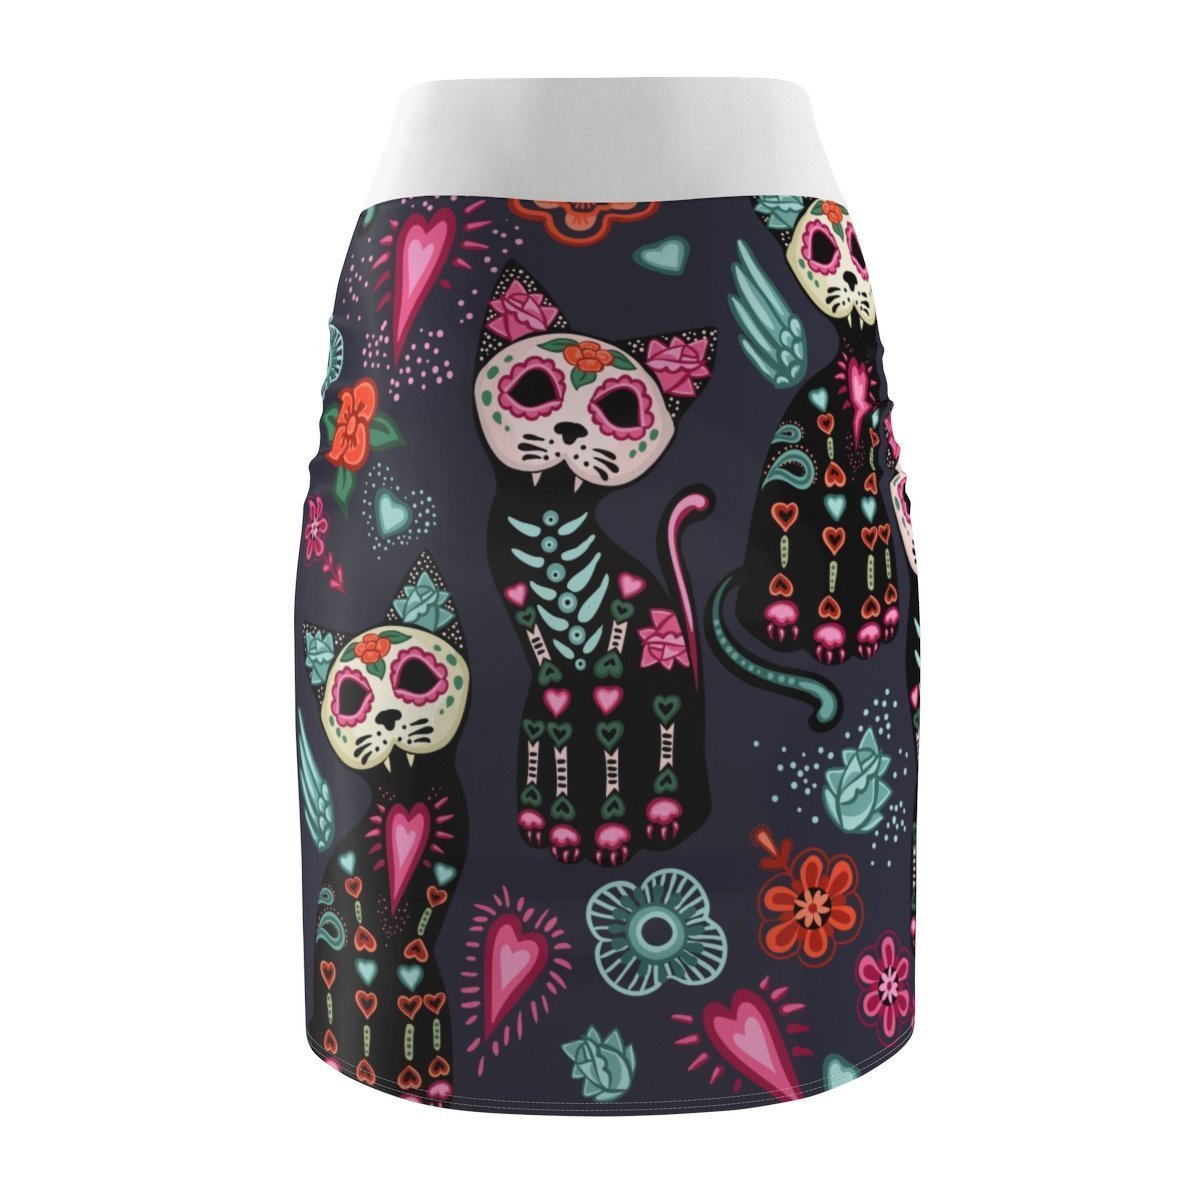 Clothes with Cats for Cat Lovers, Cat Skirt Printed with Colorful Skeleton Cats